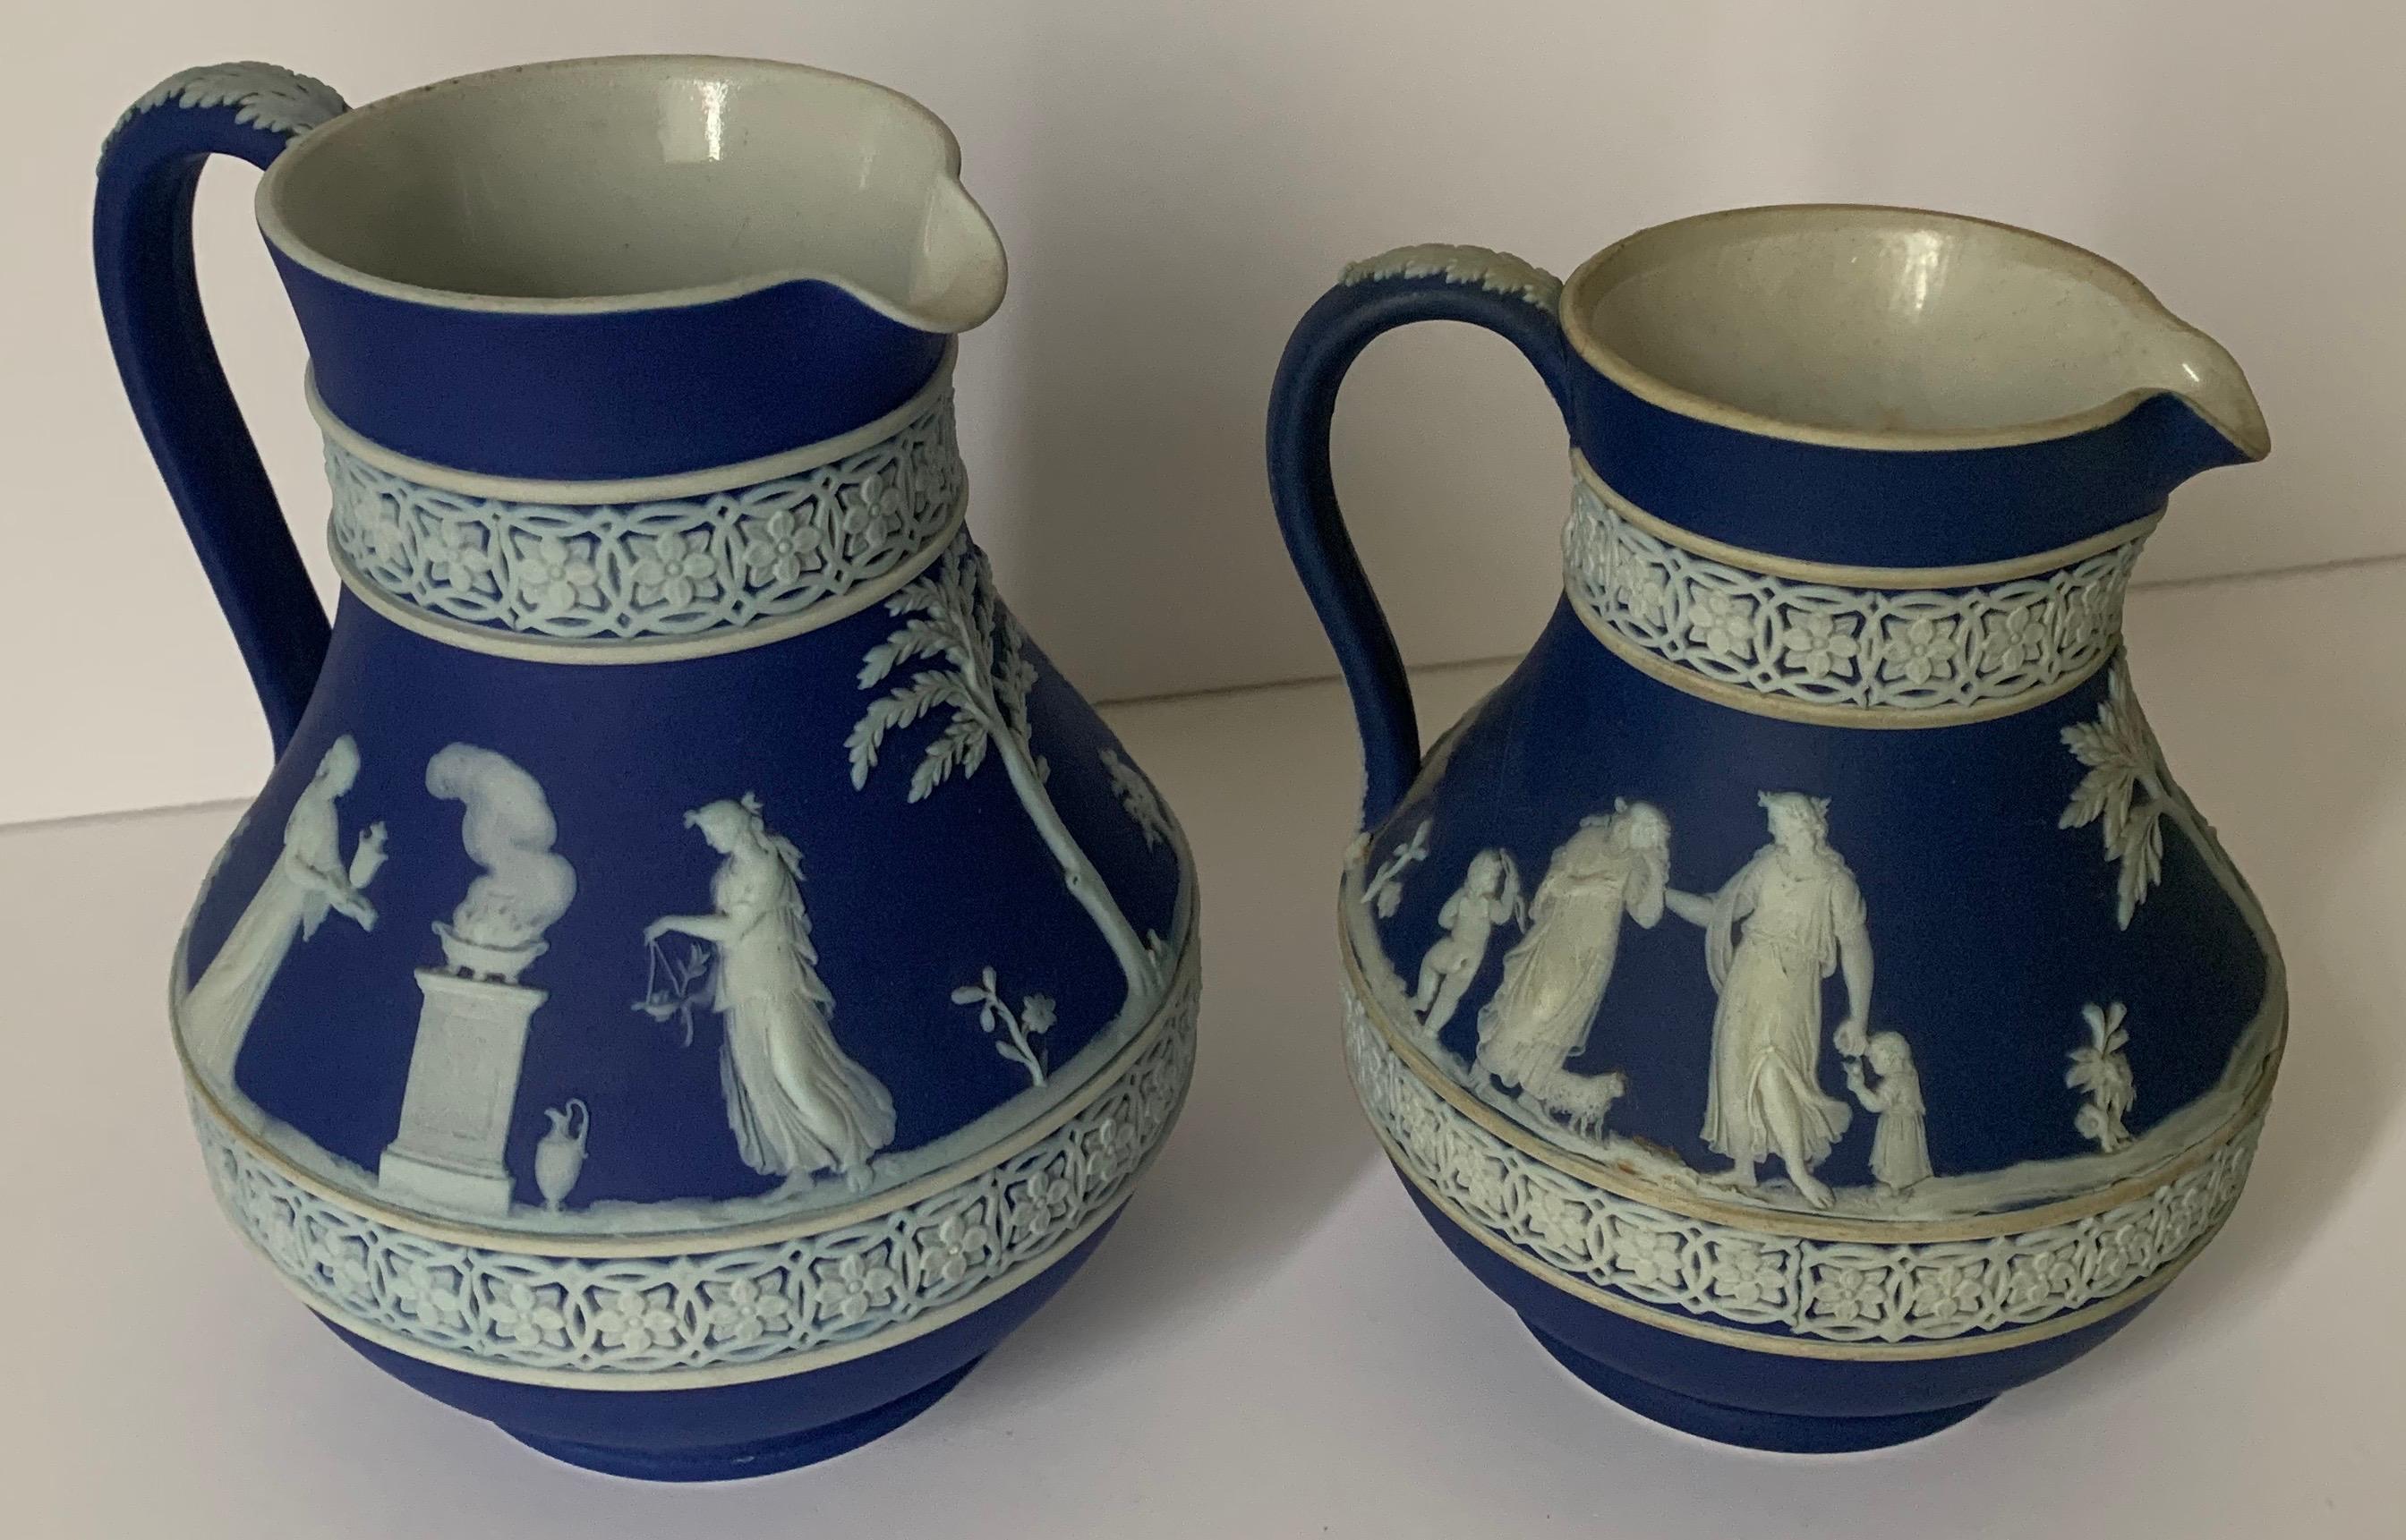 Set of 2 1930s Wedgwood jasperware pitchers. Each pitcher features a neoclassical motif. Each pitcher stamped Wedgwood on the underside and stamped 30/ 36 (as shown) indicating they were made in the 1930s. Set included 2 dark blue jaspwerware